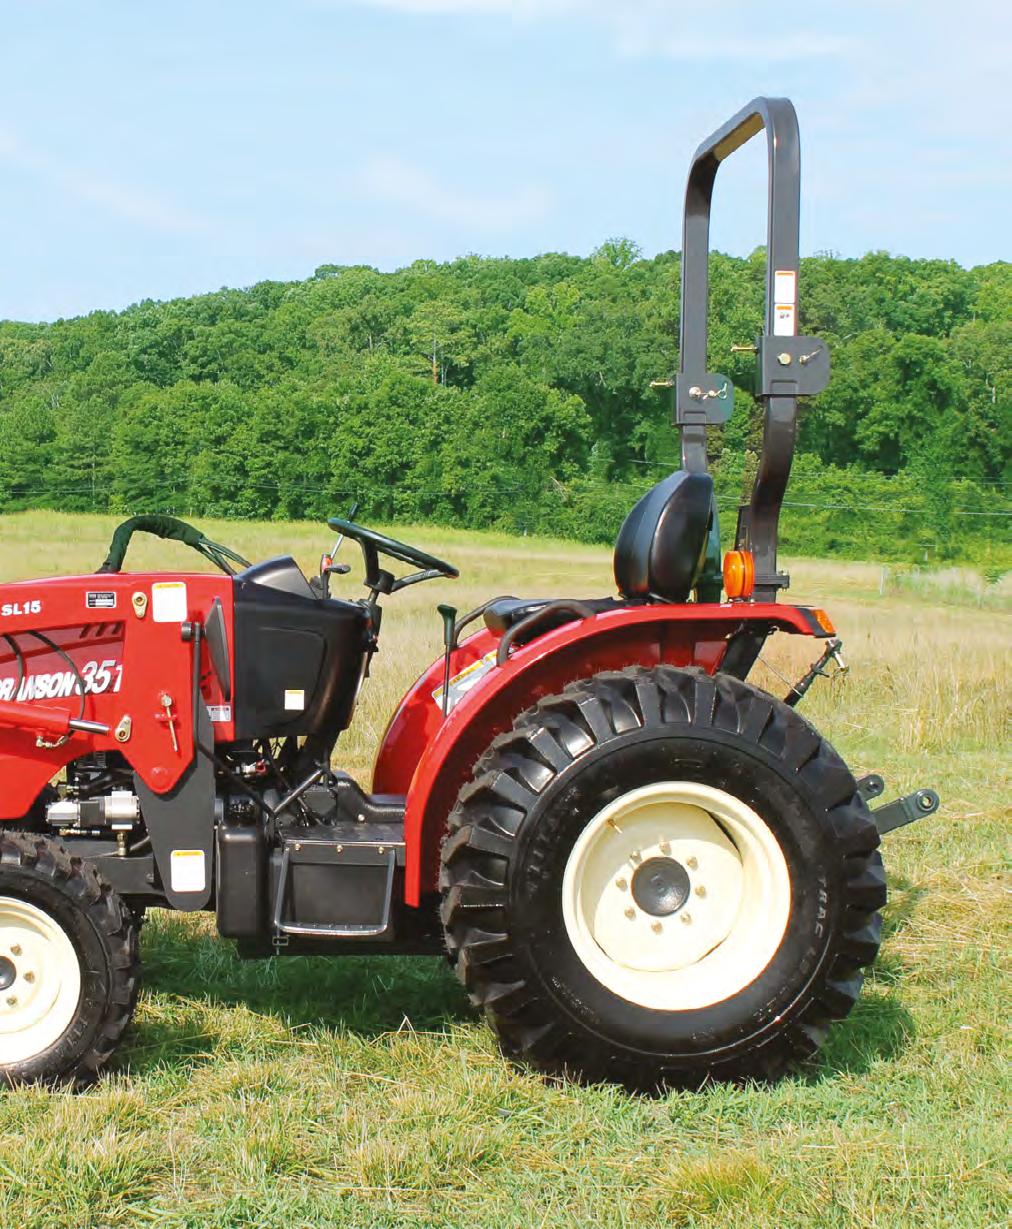 15 SERIES TRACTOR DIMENSIONS Wheelbase: 65.